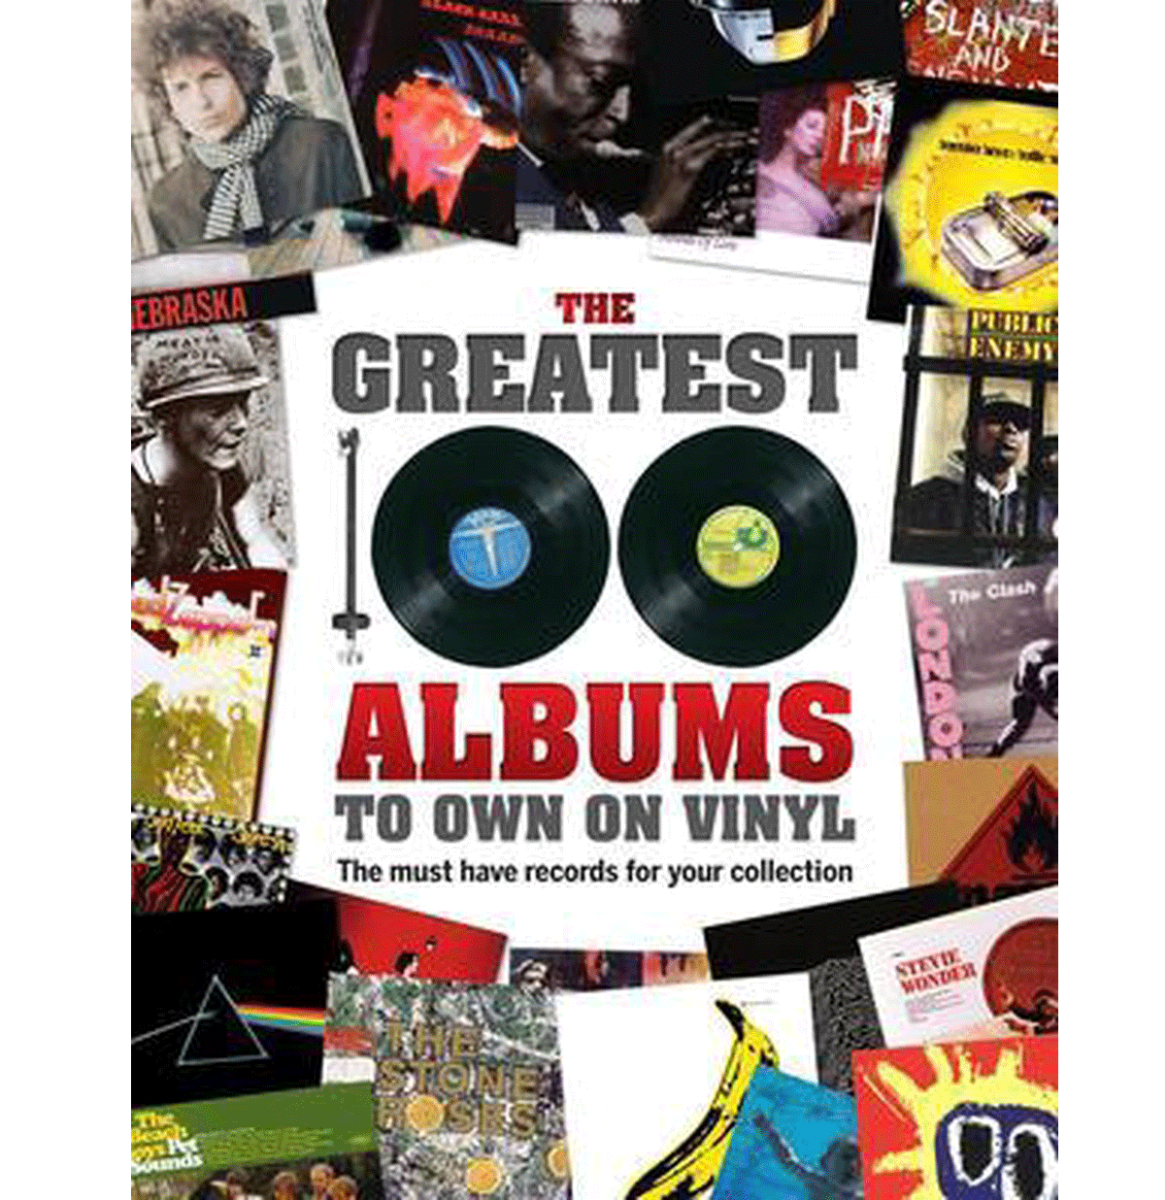 The Greatest 100 Albums to own on Vinyl: The must have records for your collection Boek